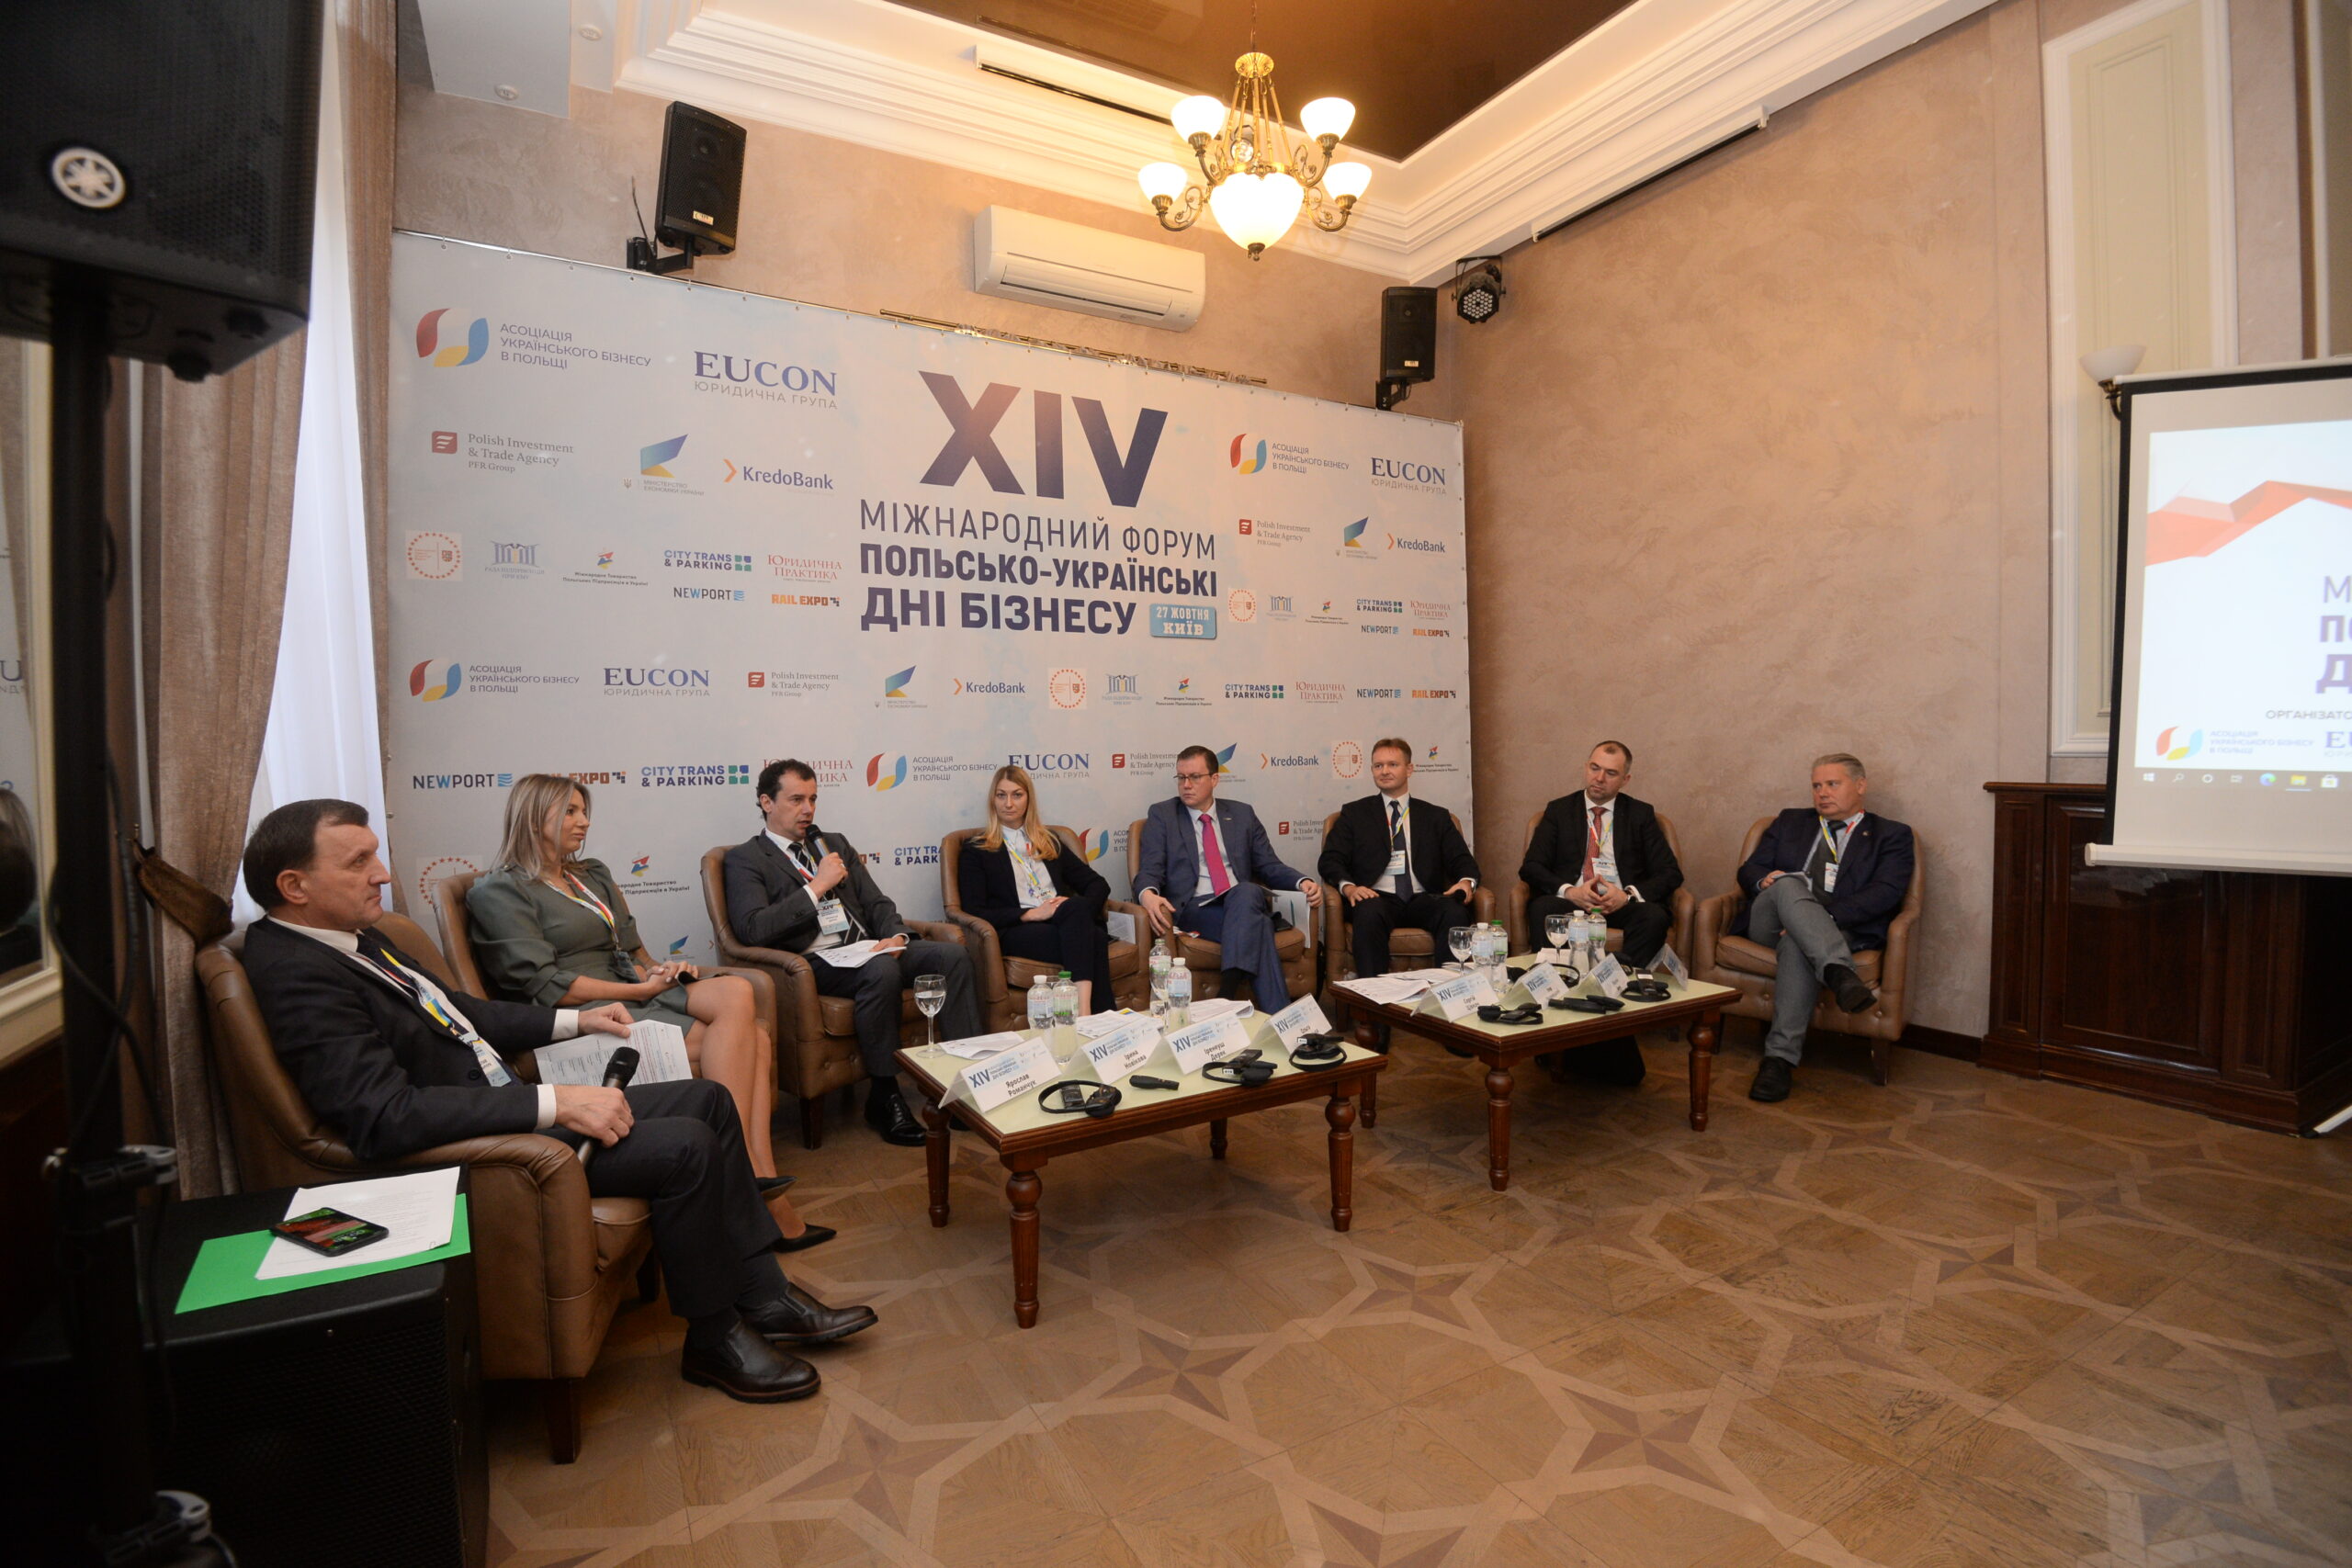 INVESTMENTS, INFRASTRUCTURE, INDUSTRY: SEARCH OF SYNERGУ AND NEW OPPORTUNITIES. XIV INTERNATIONAL FORUM “POLISH-UKRAINIAN BUSINESS DAYS” HELD